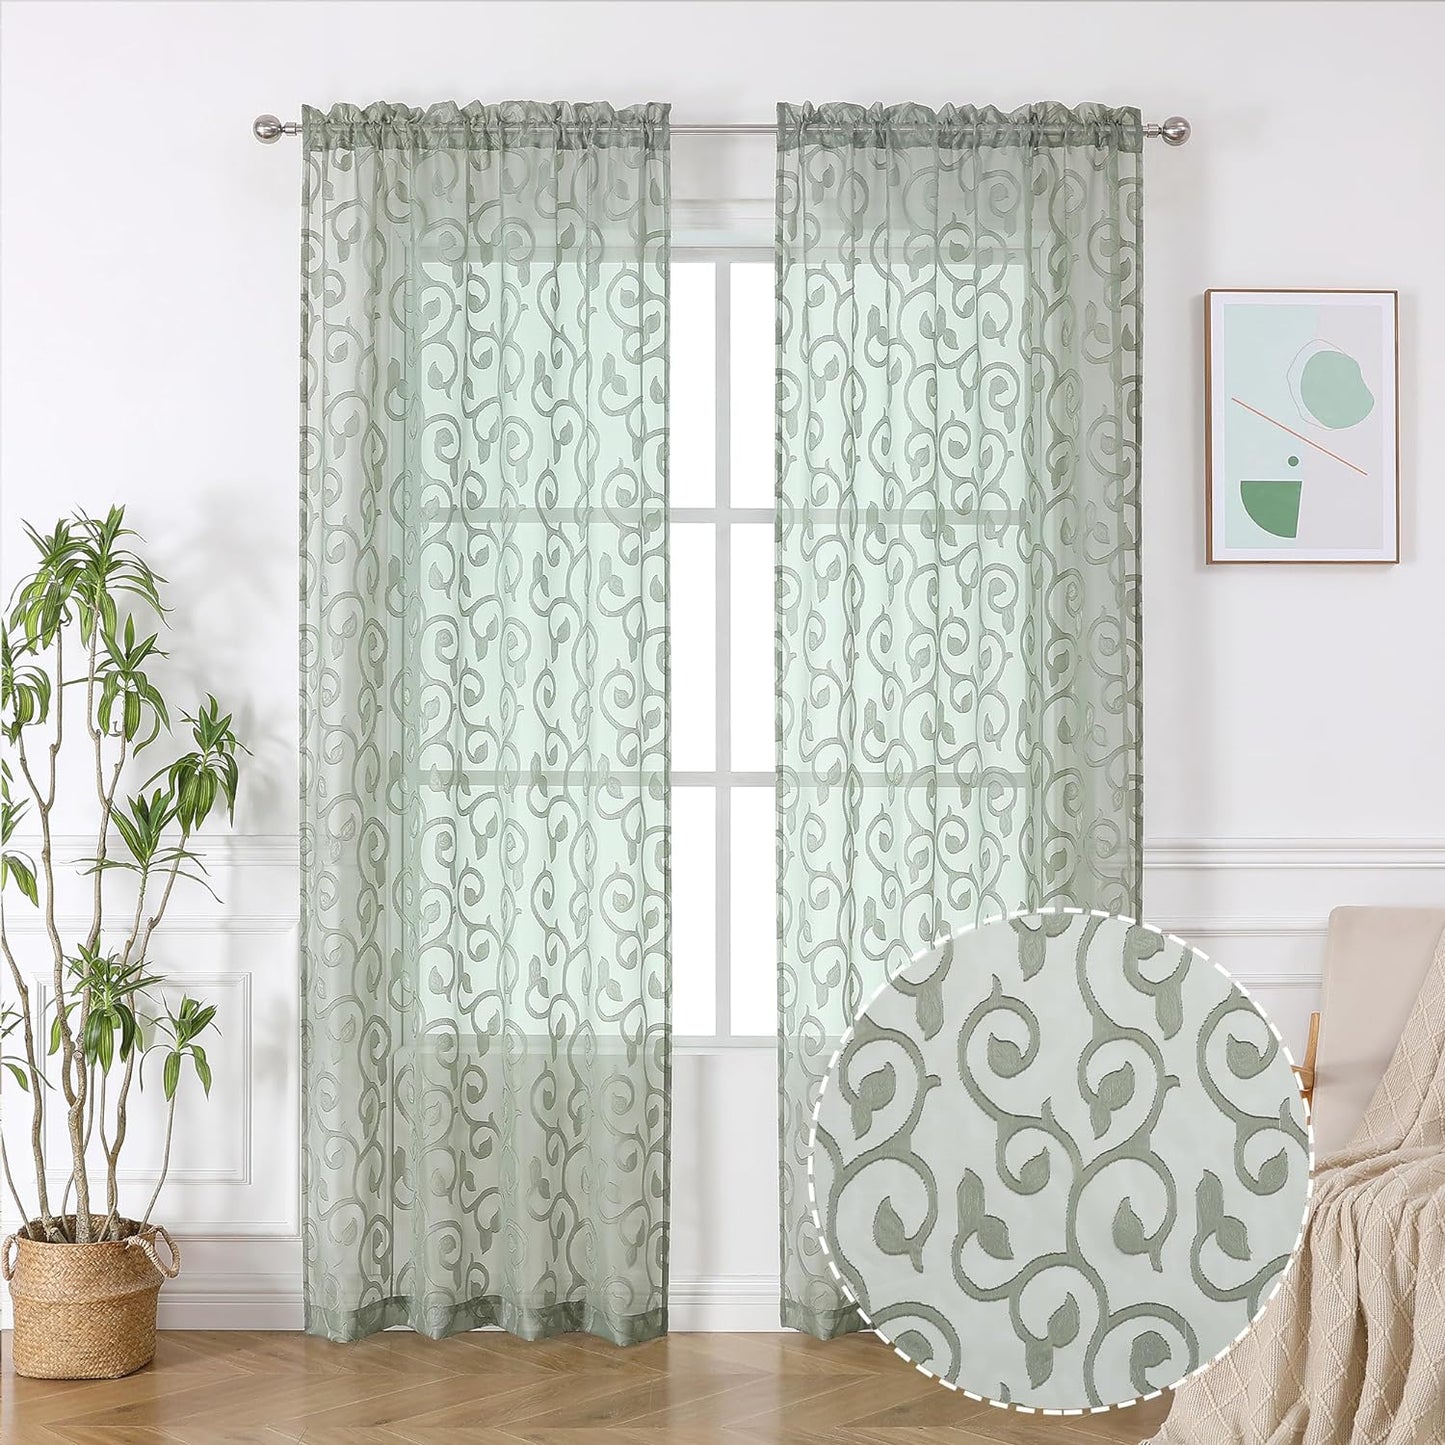 OWENIE Furman Sheer White Curtains 84 Inches Long for Bedroom Living Room 2 Panels Set, White Curtains Jacquard Clip Light Filtering Semi Sheer Curtain Transparent Rod Pocket Window Drapes, 2 Pcs  OWENIE Sage Green 40W X 84L 